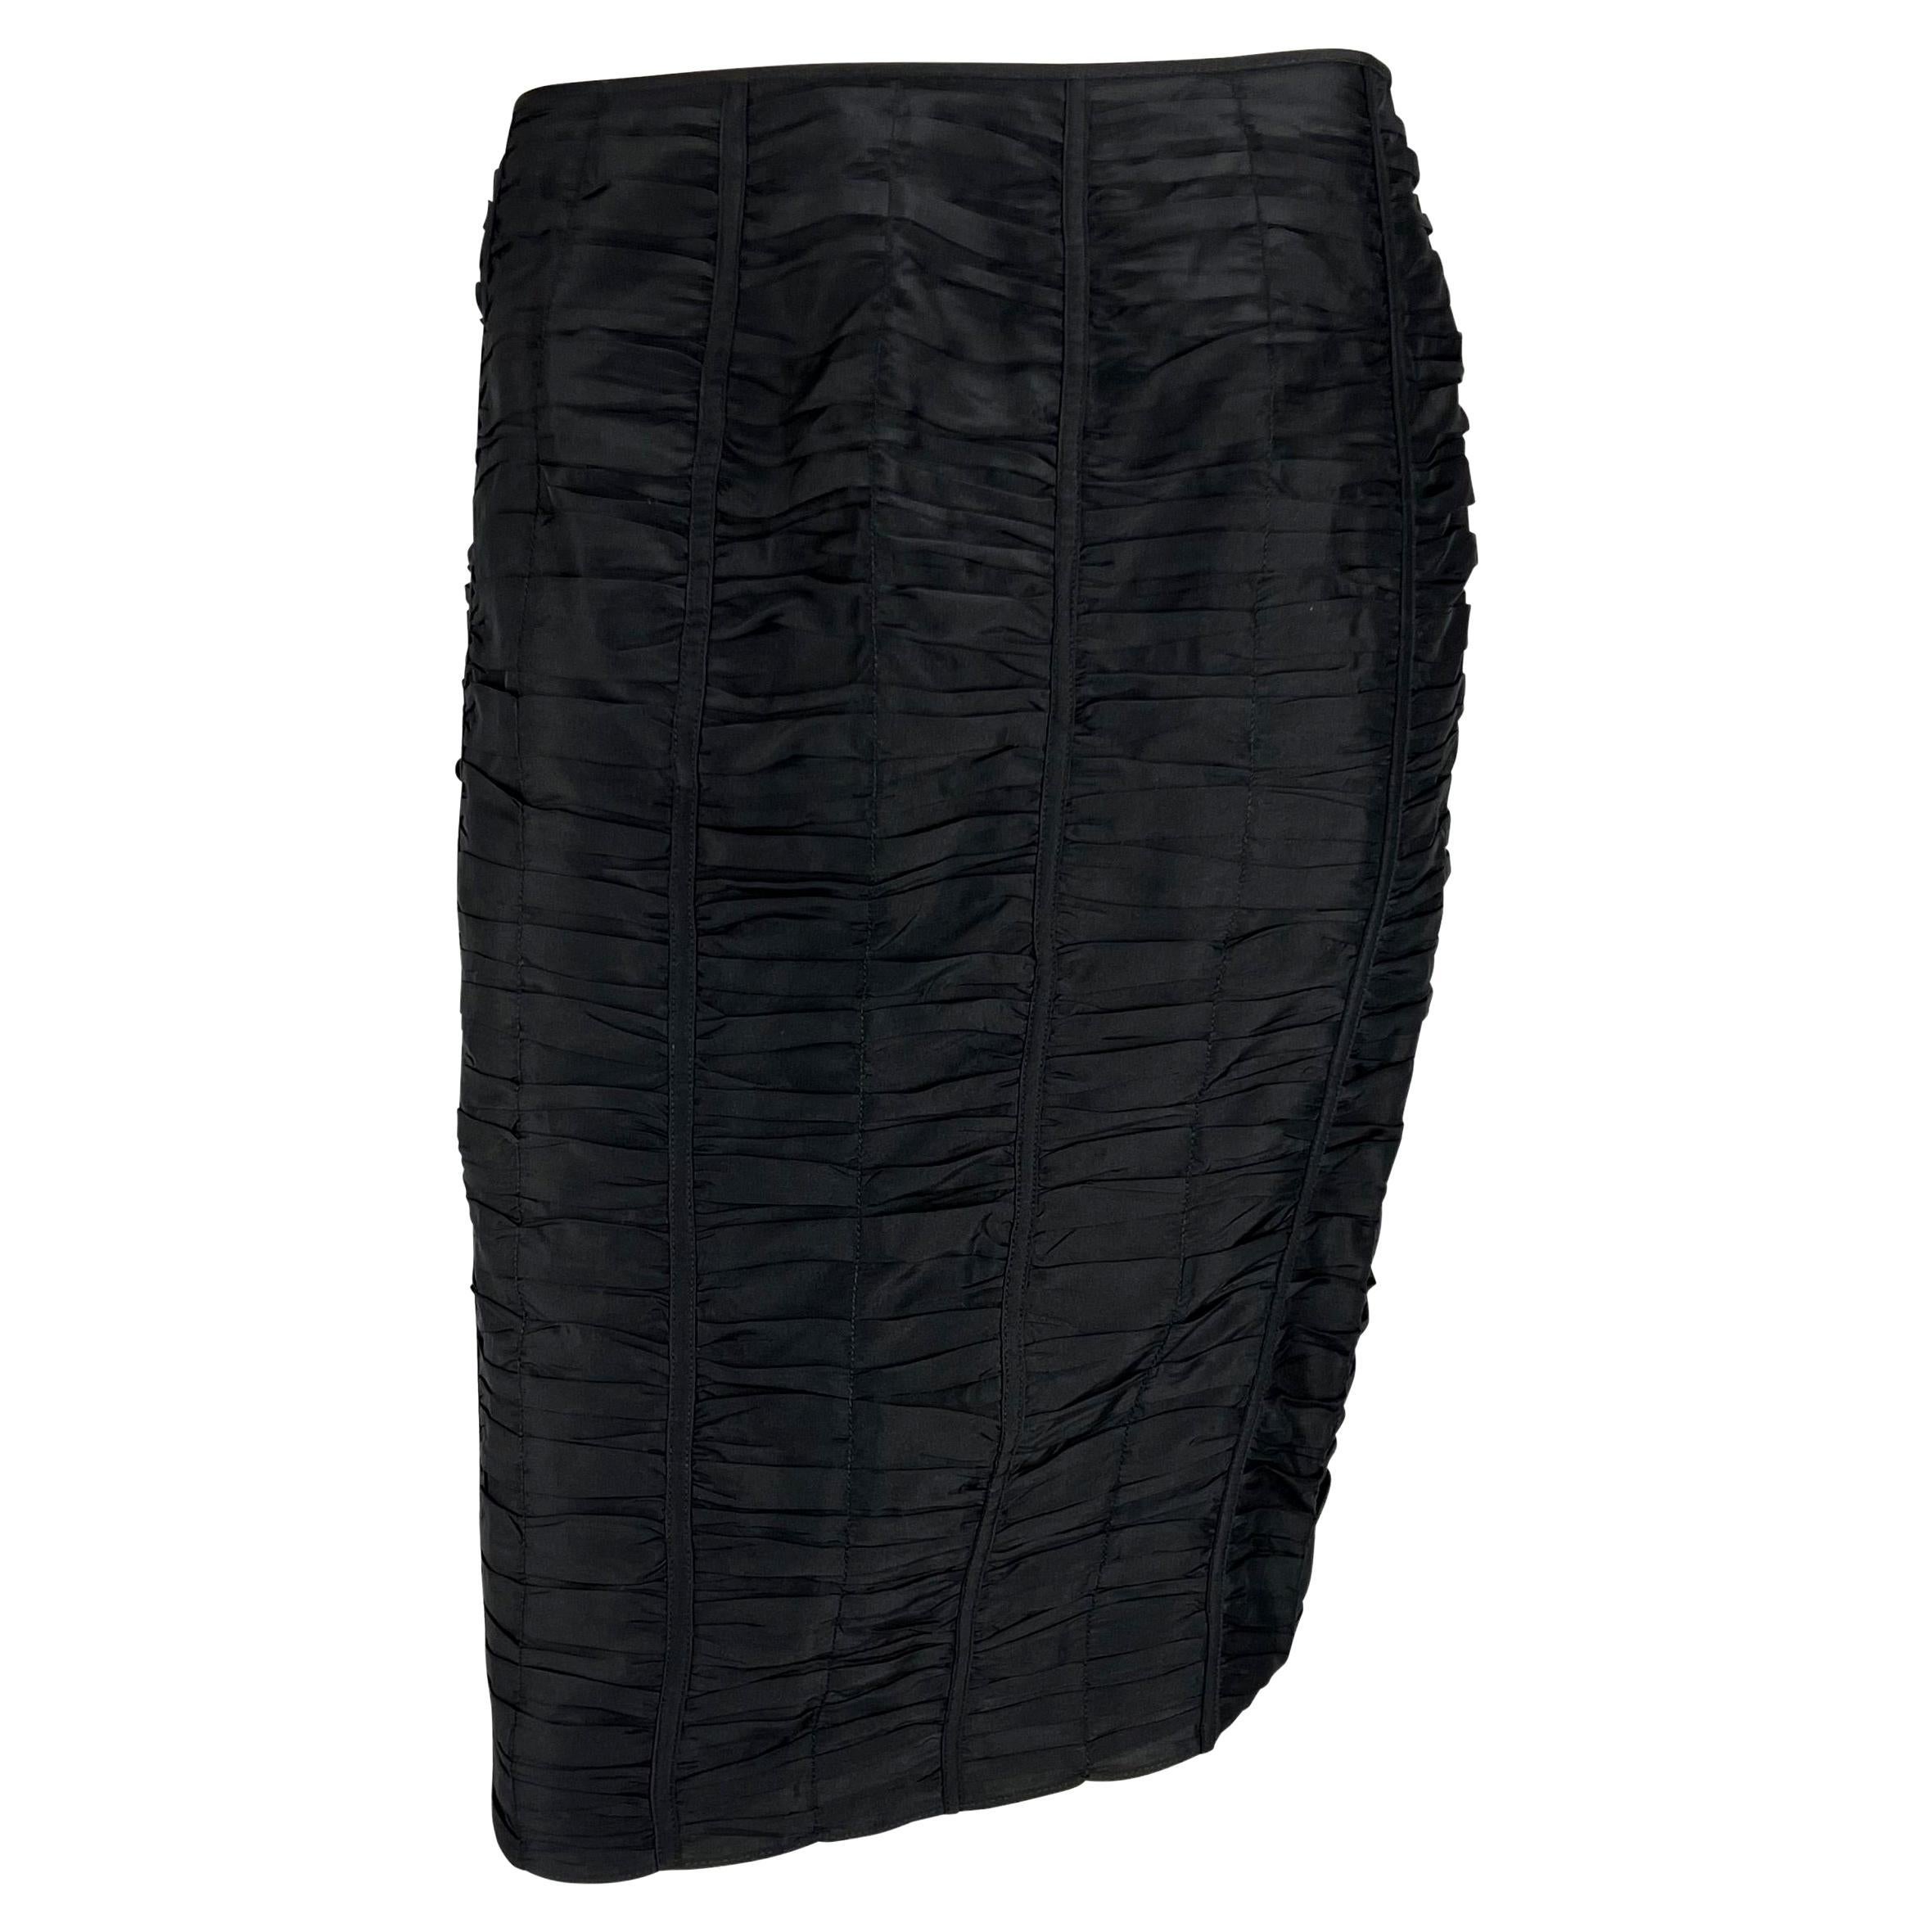  NWT S/S 2001 Gucci by Tom Ford Black Ruched Silk Skirt For Sale